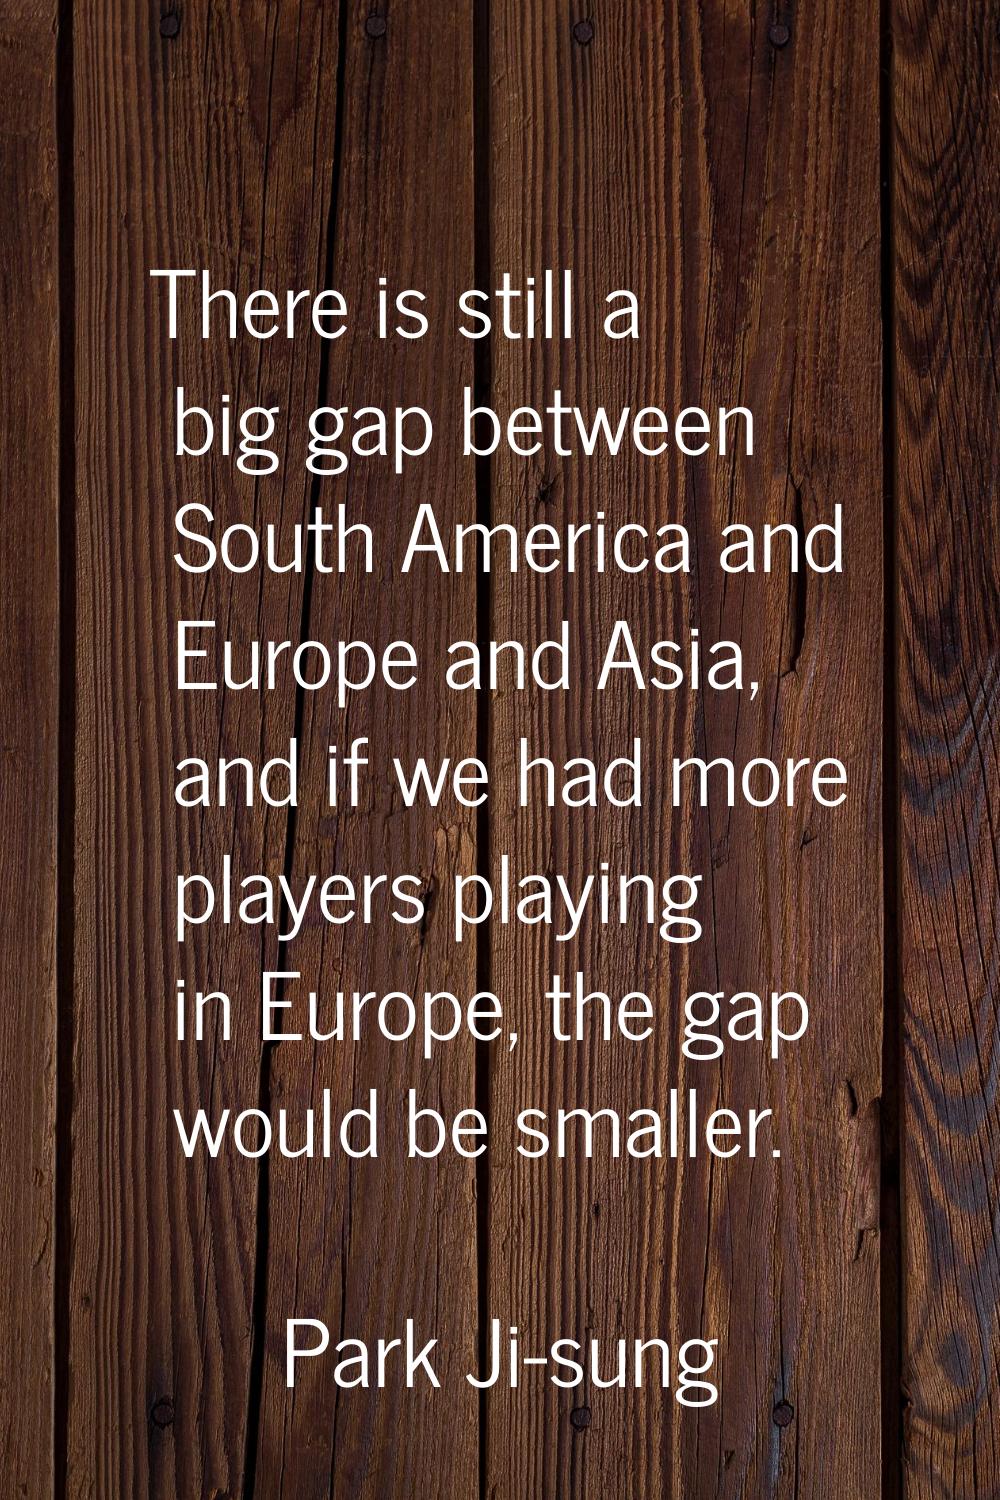 There is still a big gap between South America and Europe and Asia, and if we had more players play